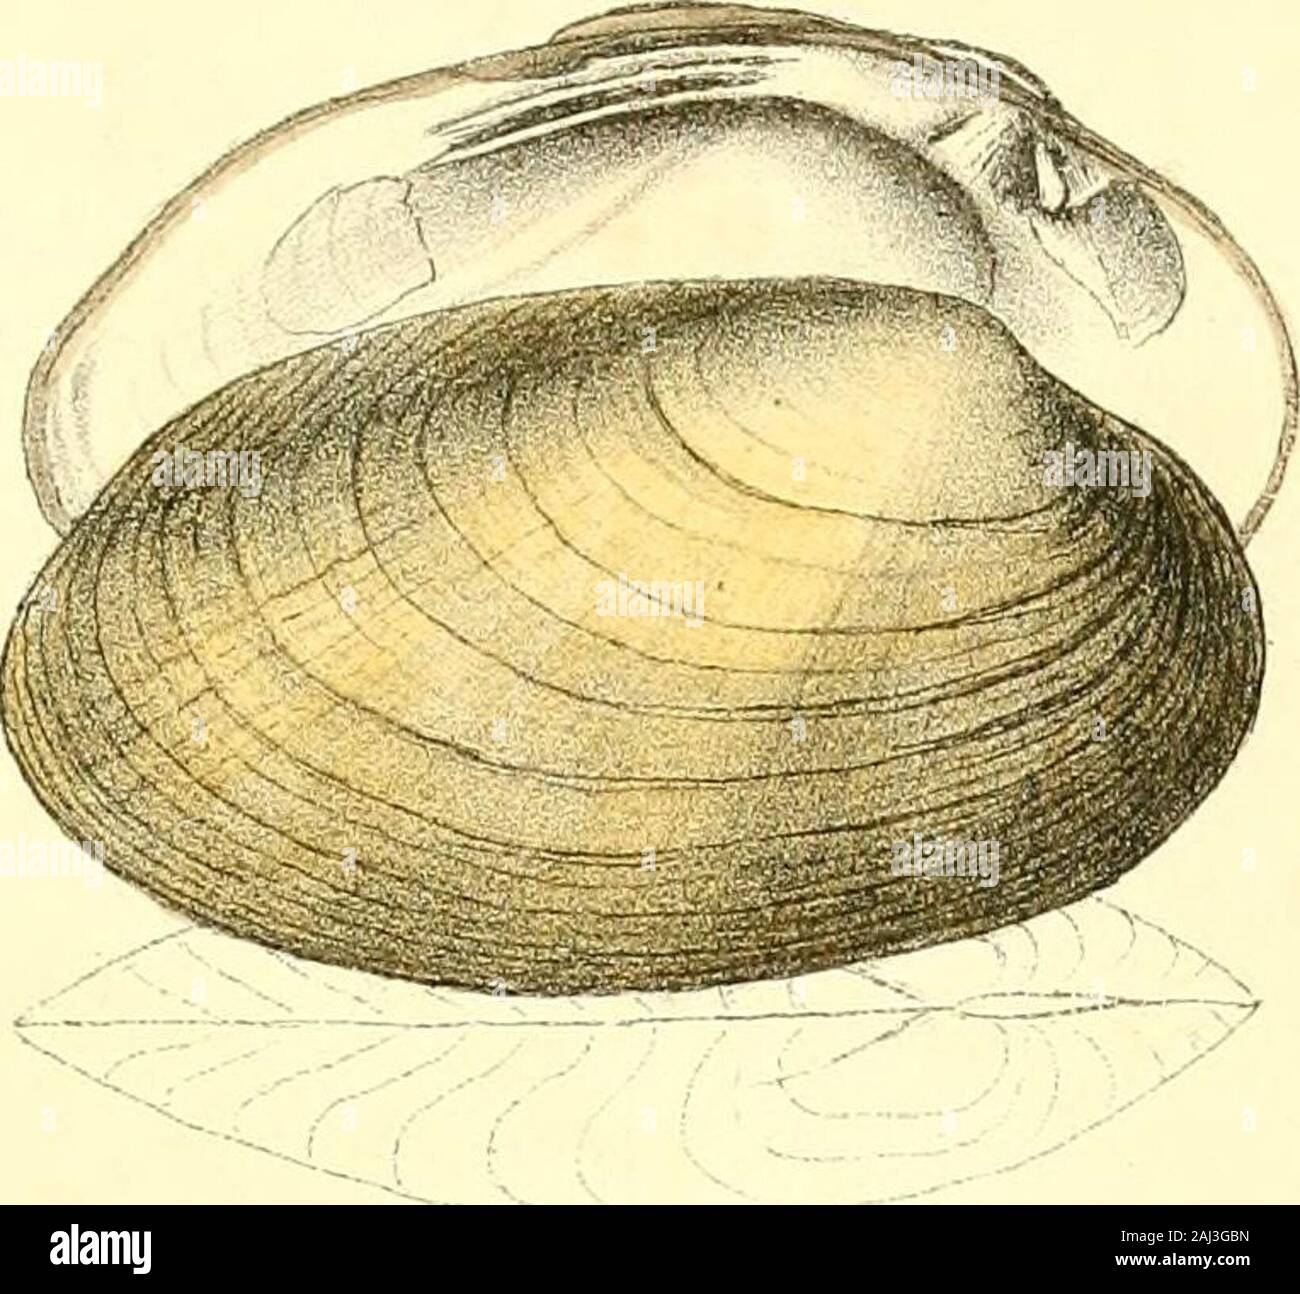 Monography of the family Unionidæ : or, Naiades of Lamarck (fresh water bivalve shells) of North America ... . redis from the Scioto river, and was presented by Dr.William Blanding. 60UNIO ELLIPSIFORMIS. Plate XXXIV.—Fig. 1. DESCRIPTION. Shell elliptical, slightly ventricose, produced pos-teriorly, moderately thick; disks slightly contractedanteriorly; umbonial slope rounded; beaks slightlyprominent, approximate, simple; basal margin dilatedposteriorly to the middle; within bluish; cardinal teeththick, direct. OBSERVATIONS. This species I have seen only in the cabinet of Mr.John Phillips, who Stock Photo